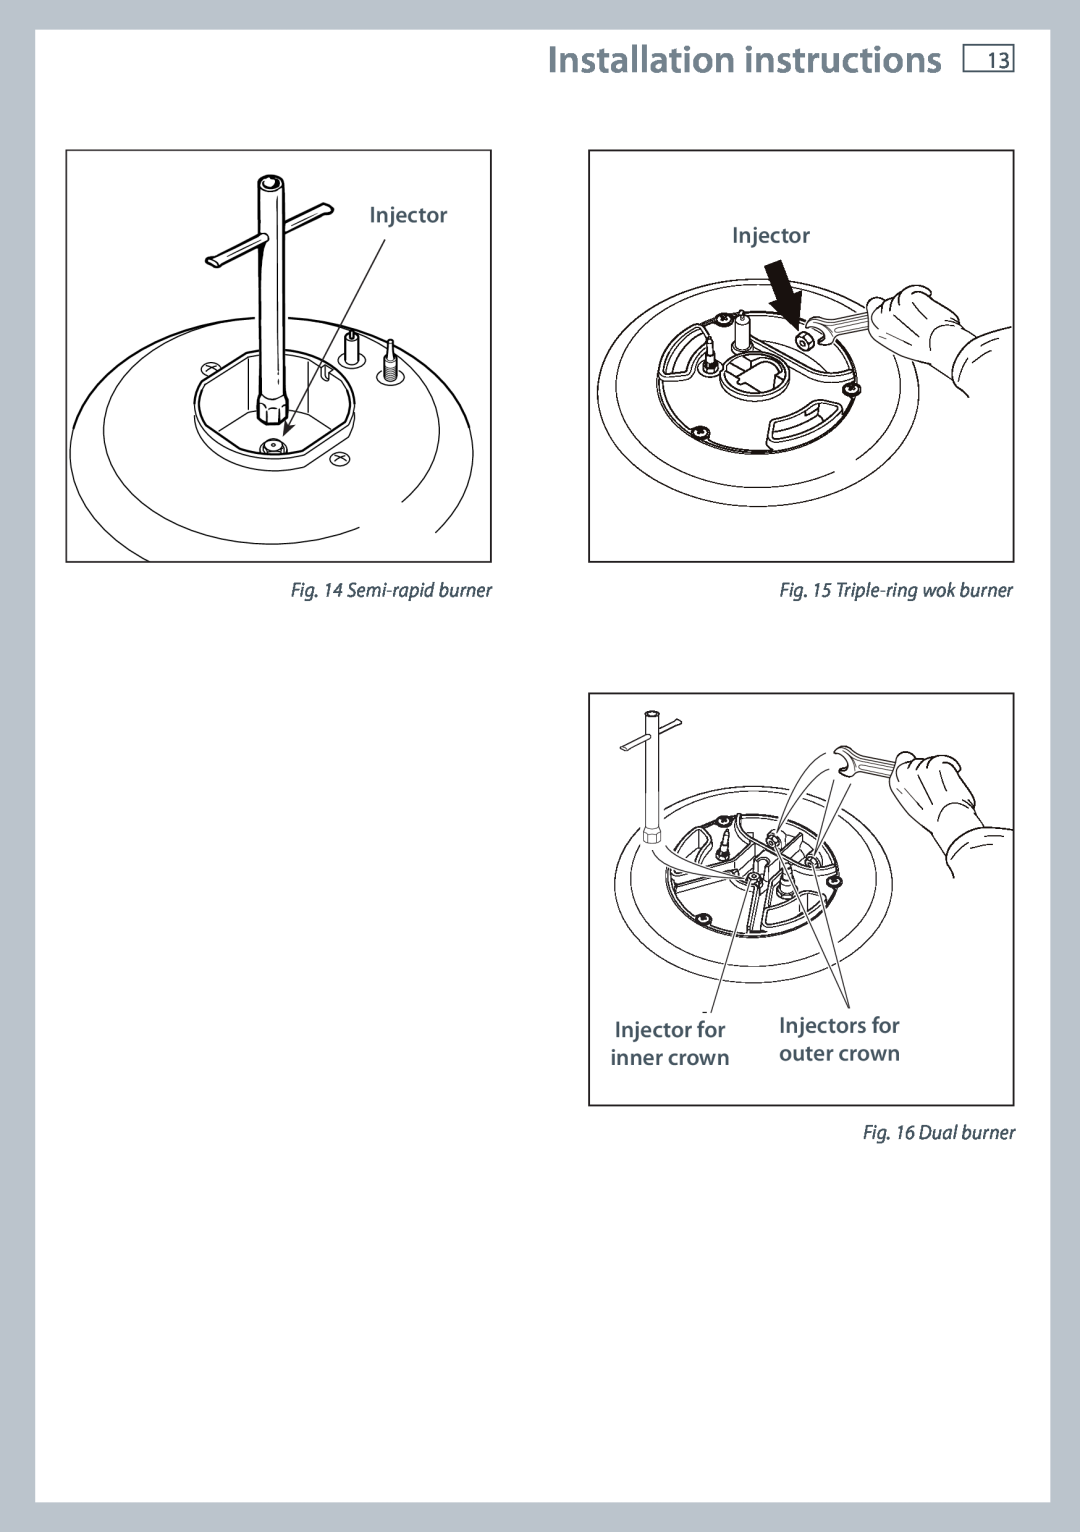 Fisher & Paykel OR90SDBGFX Installation instructions, Semi-rapid burner, Triple-ring wok burner, inner crown, outer crown 